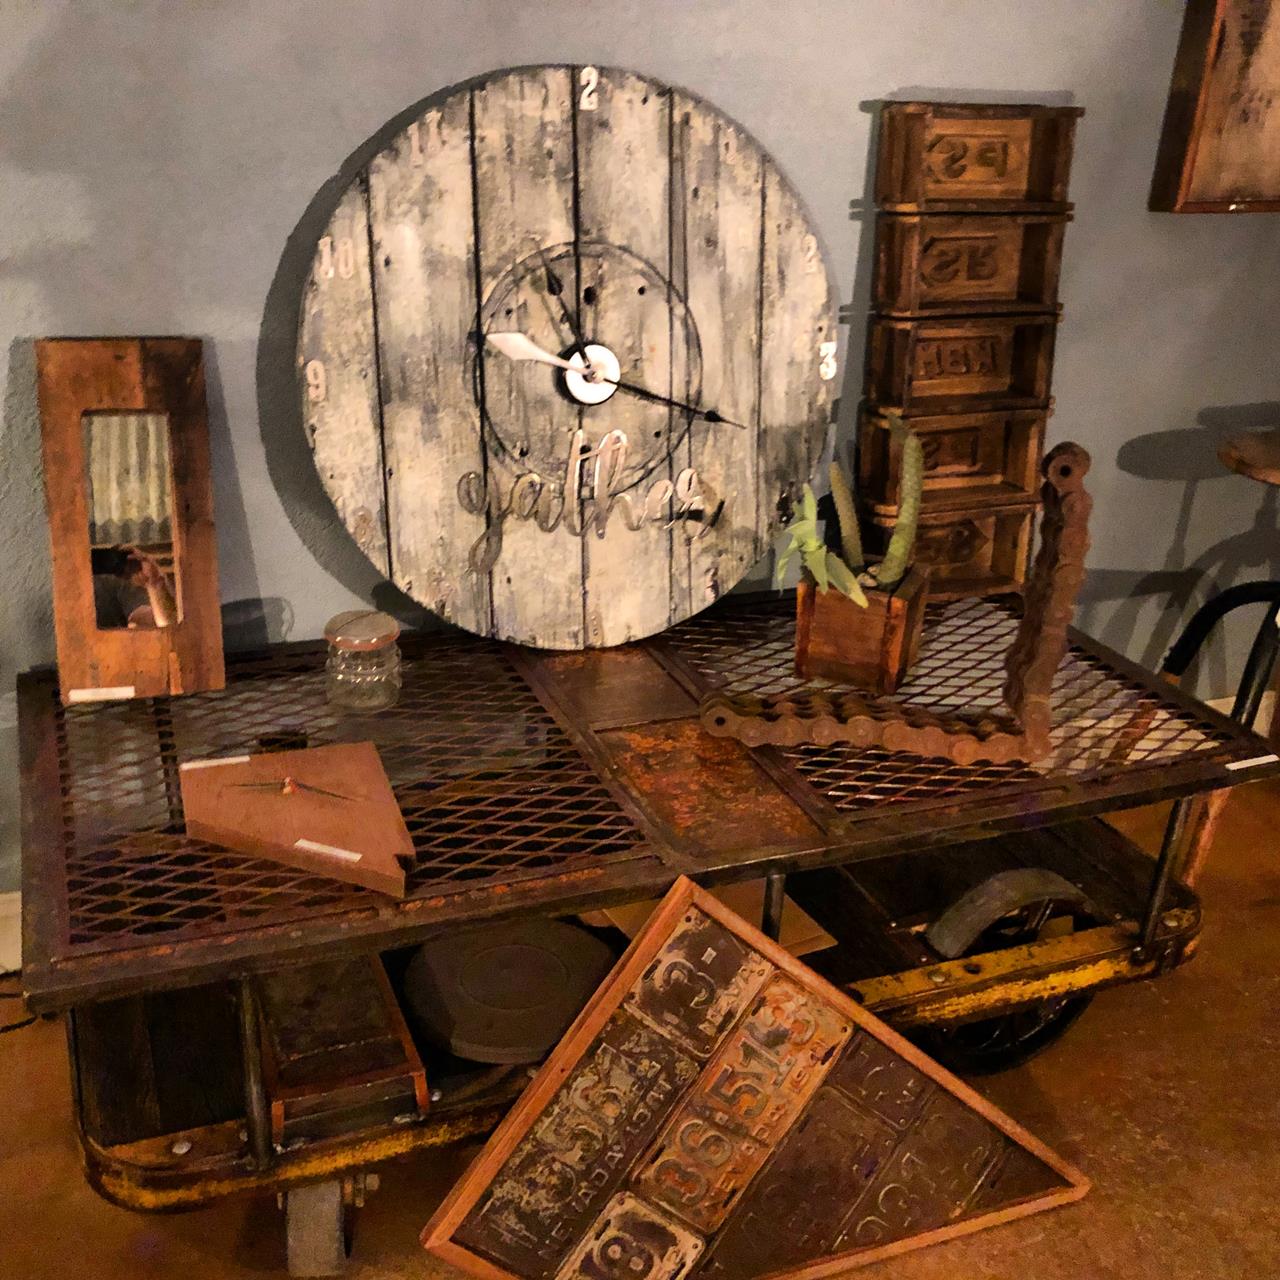 Rustic industrial table -1389.00 Clock 239.00 curbside p/u and delivery available<br/>